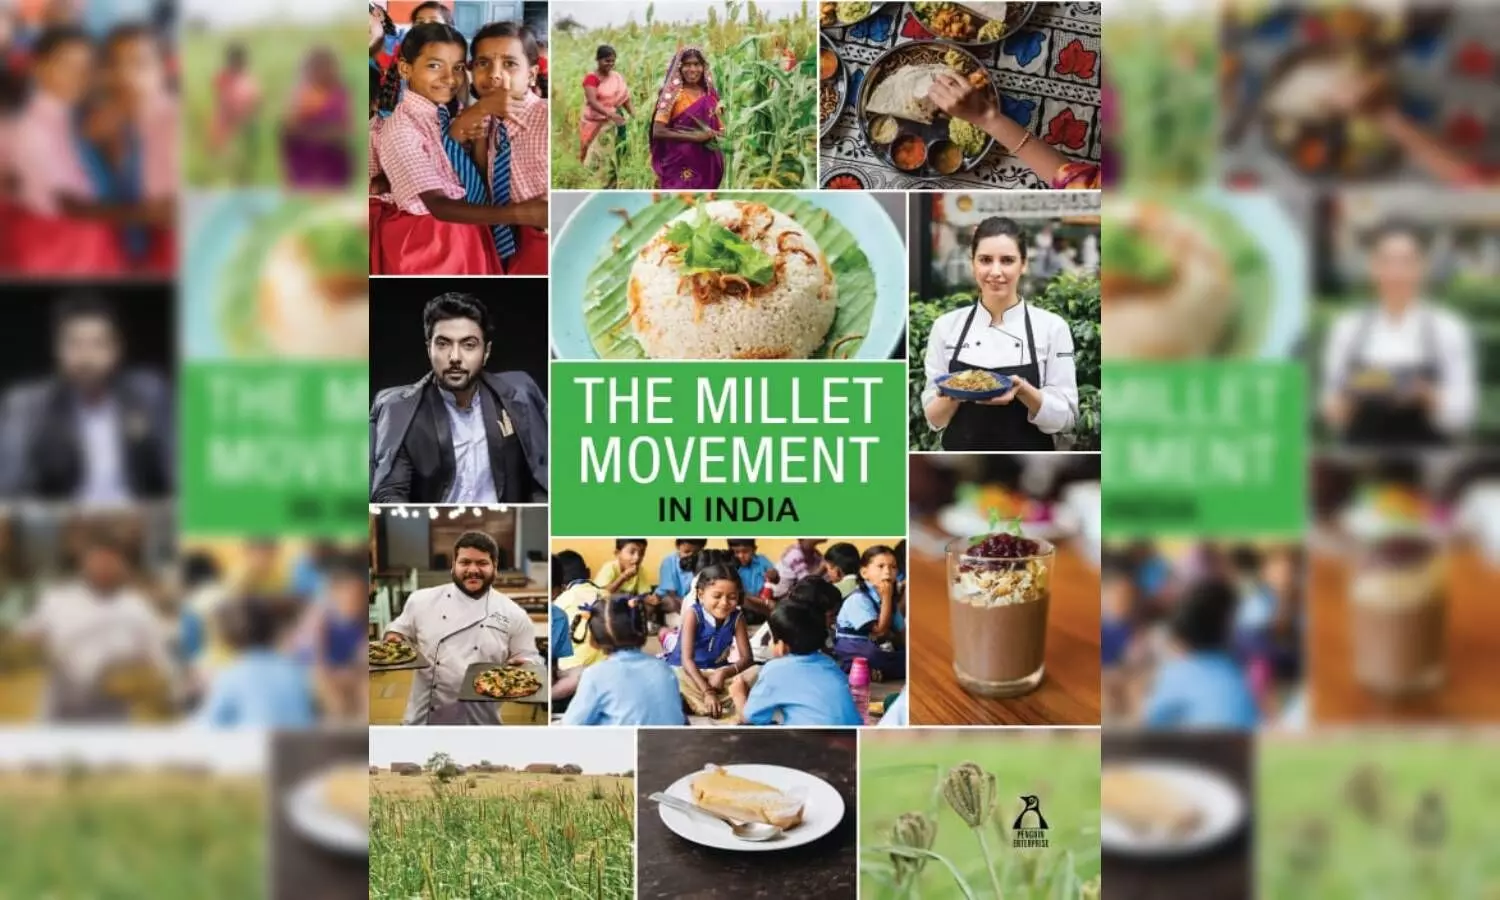 The Millet Movement in India: Bringing millets to dining tables of Indians